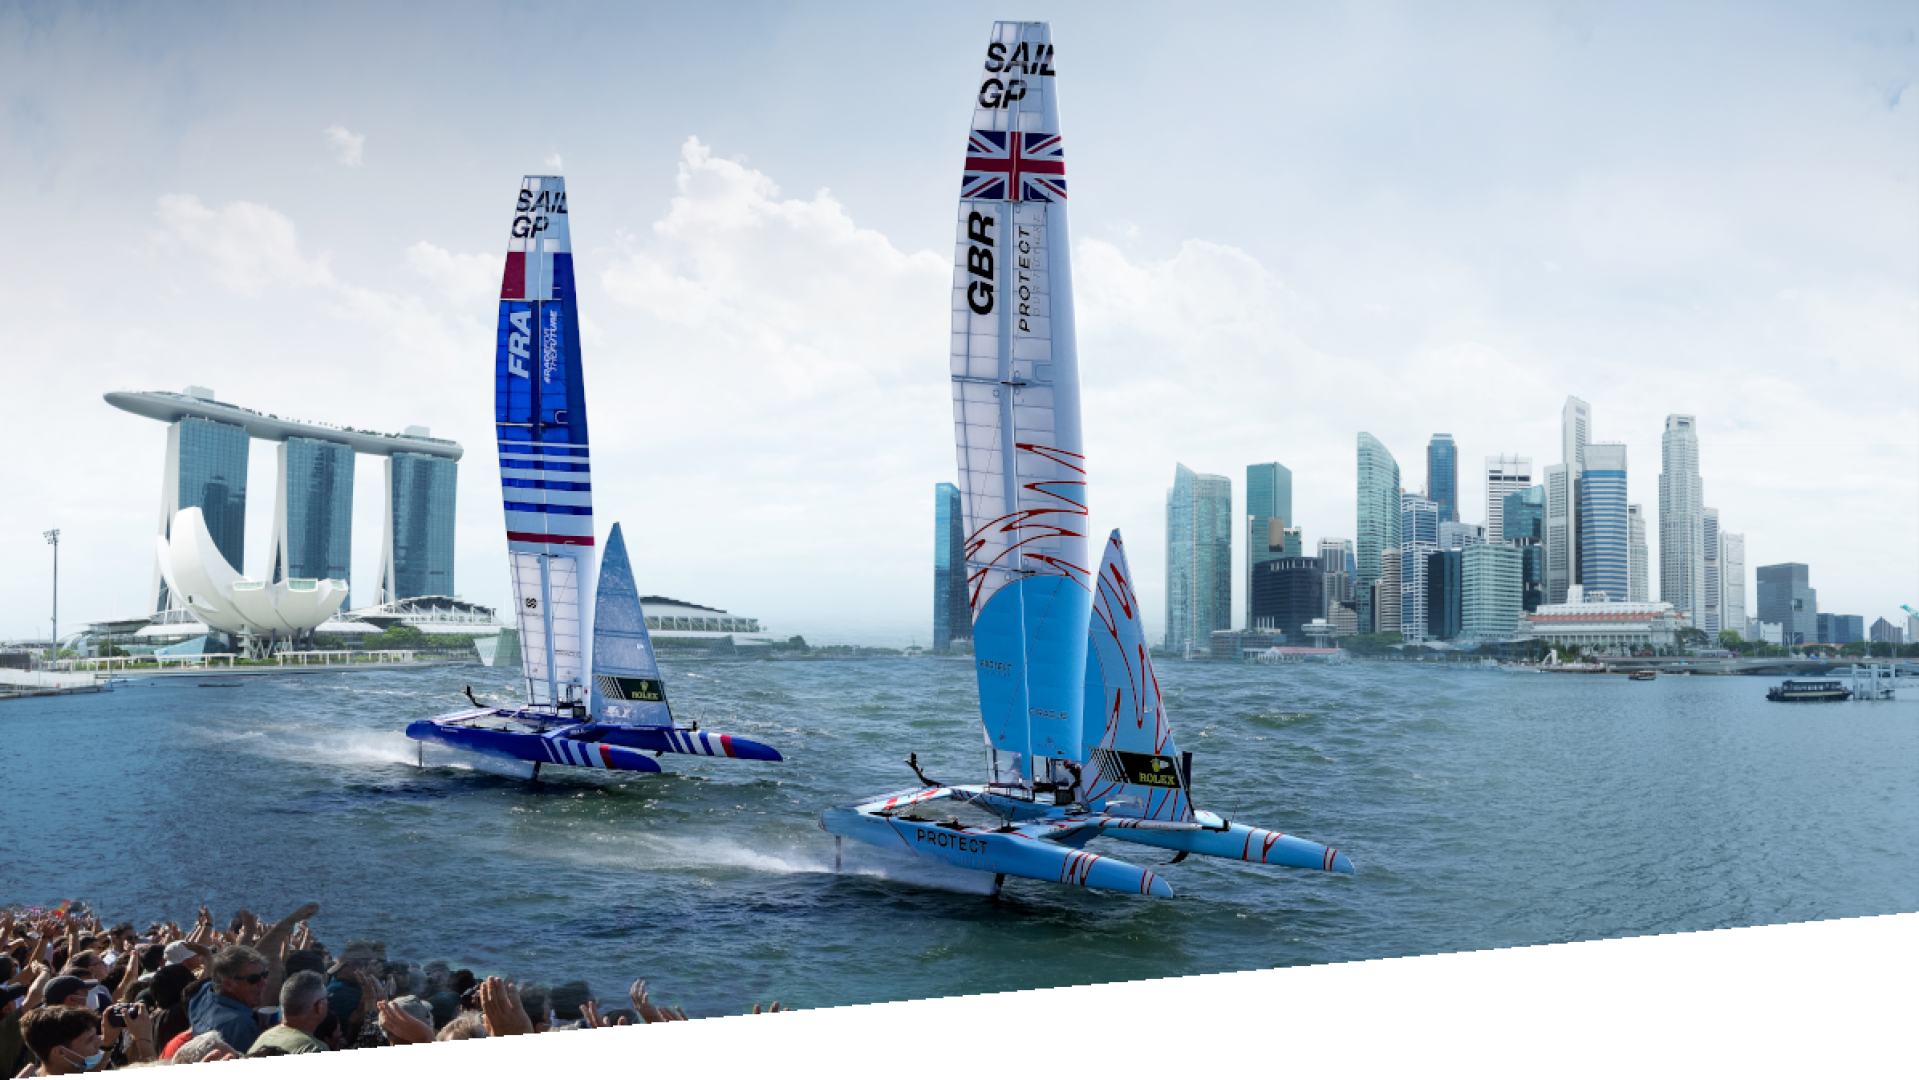 SailGP announces debut event in Asia with Singapore Sail Grand Prix  Season 3 expansion includes Singapore Sail Grand Prix on January 14-15, 2023